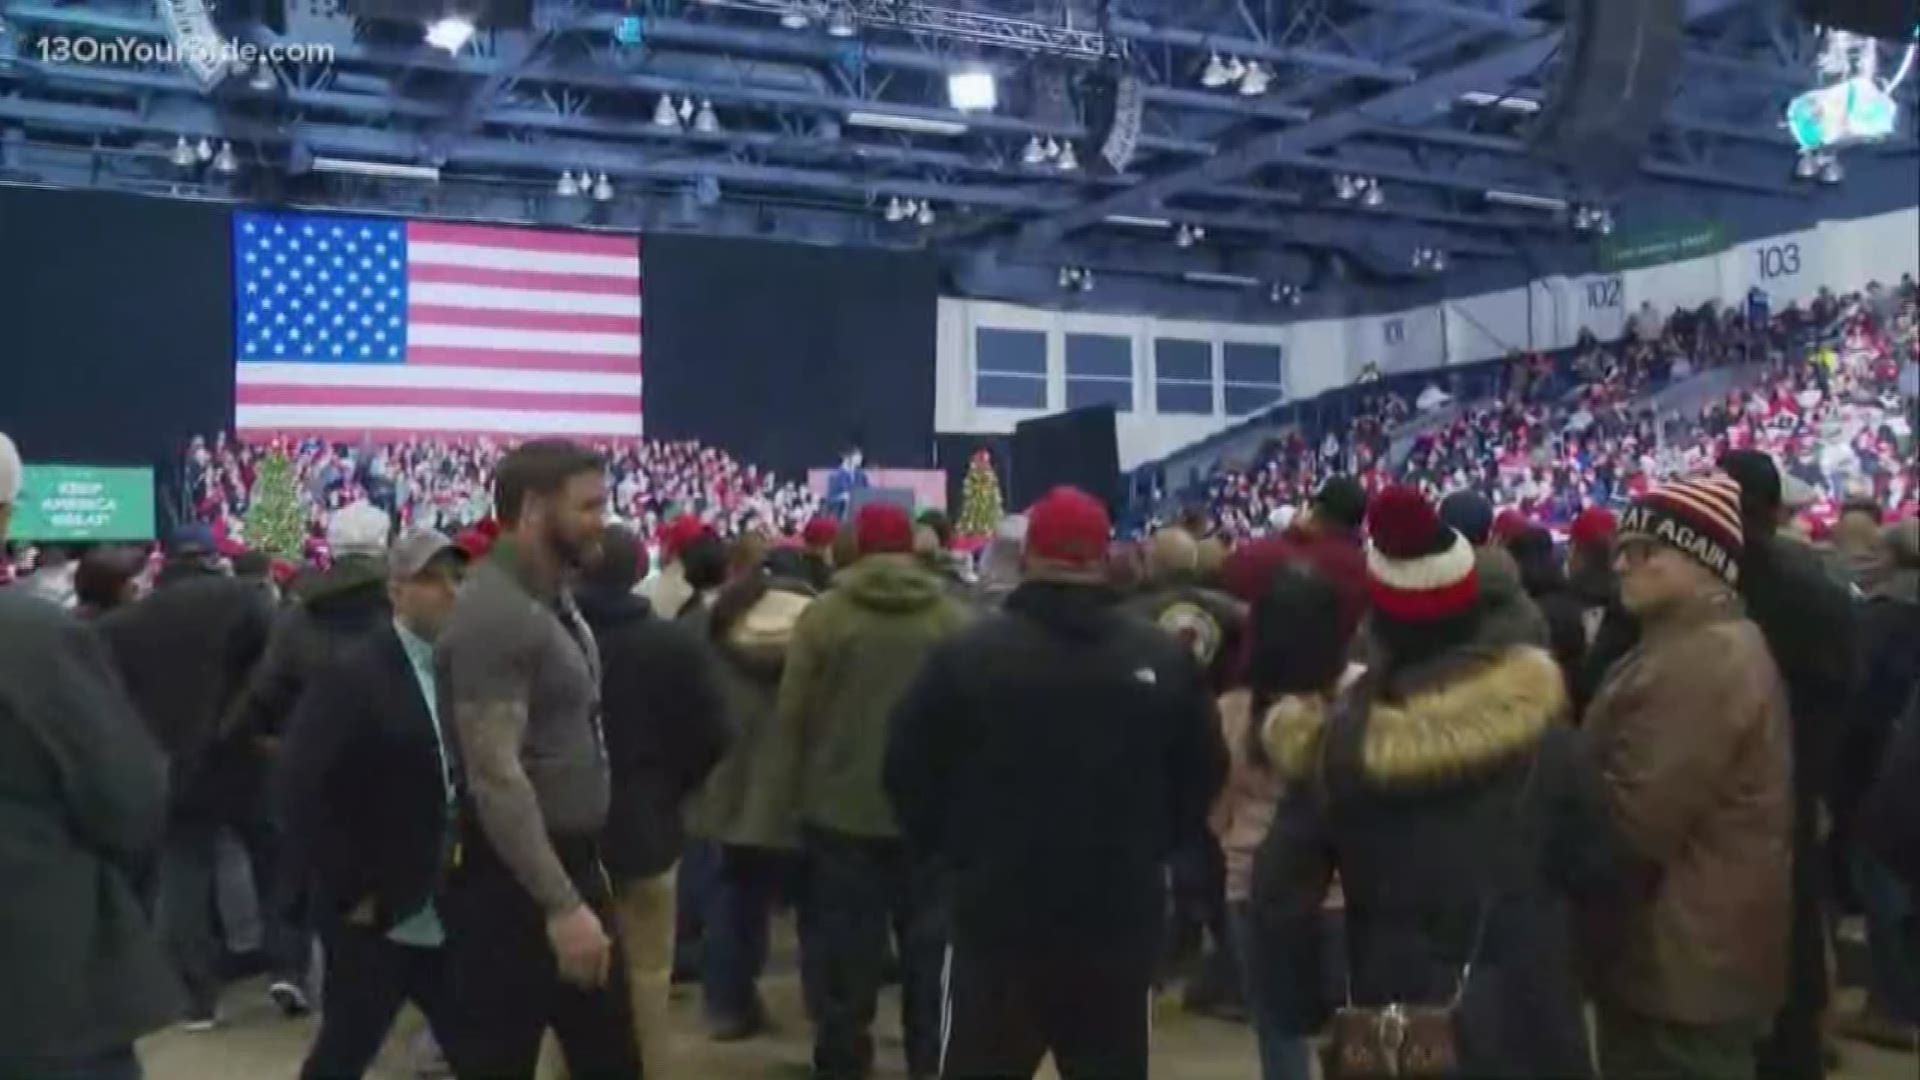 Crowds are anxiously awaiting President Donald Trump's arrival in Battle Creek for his Merry Christmas rally.